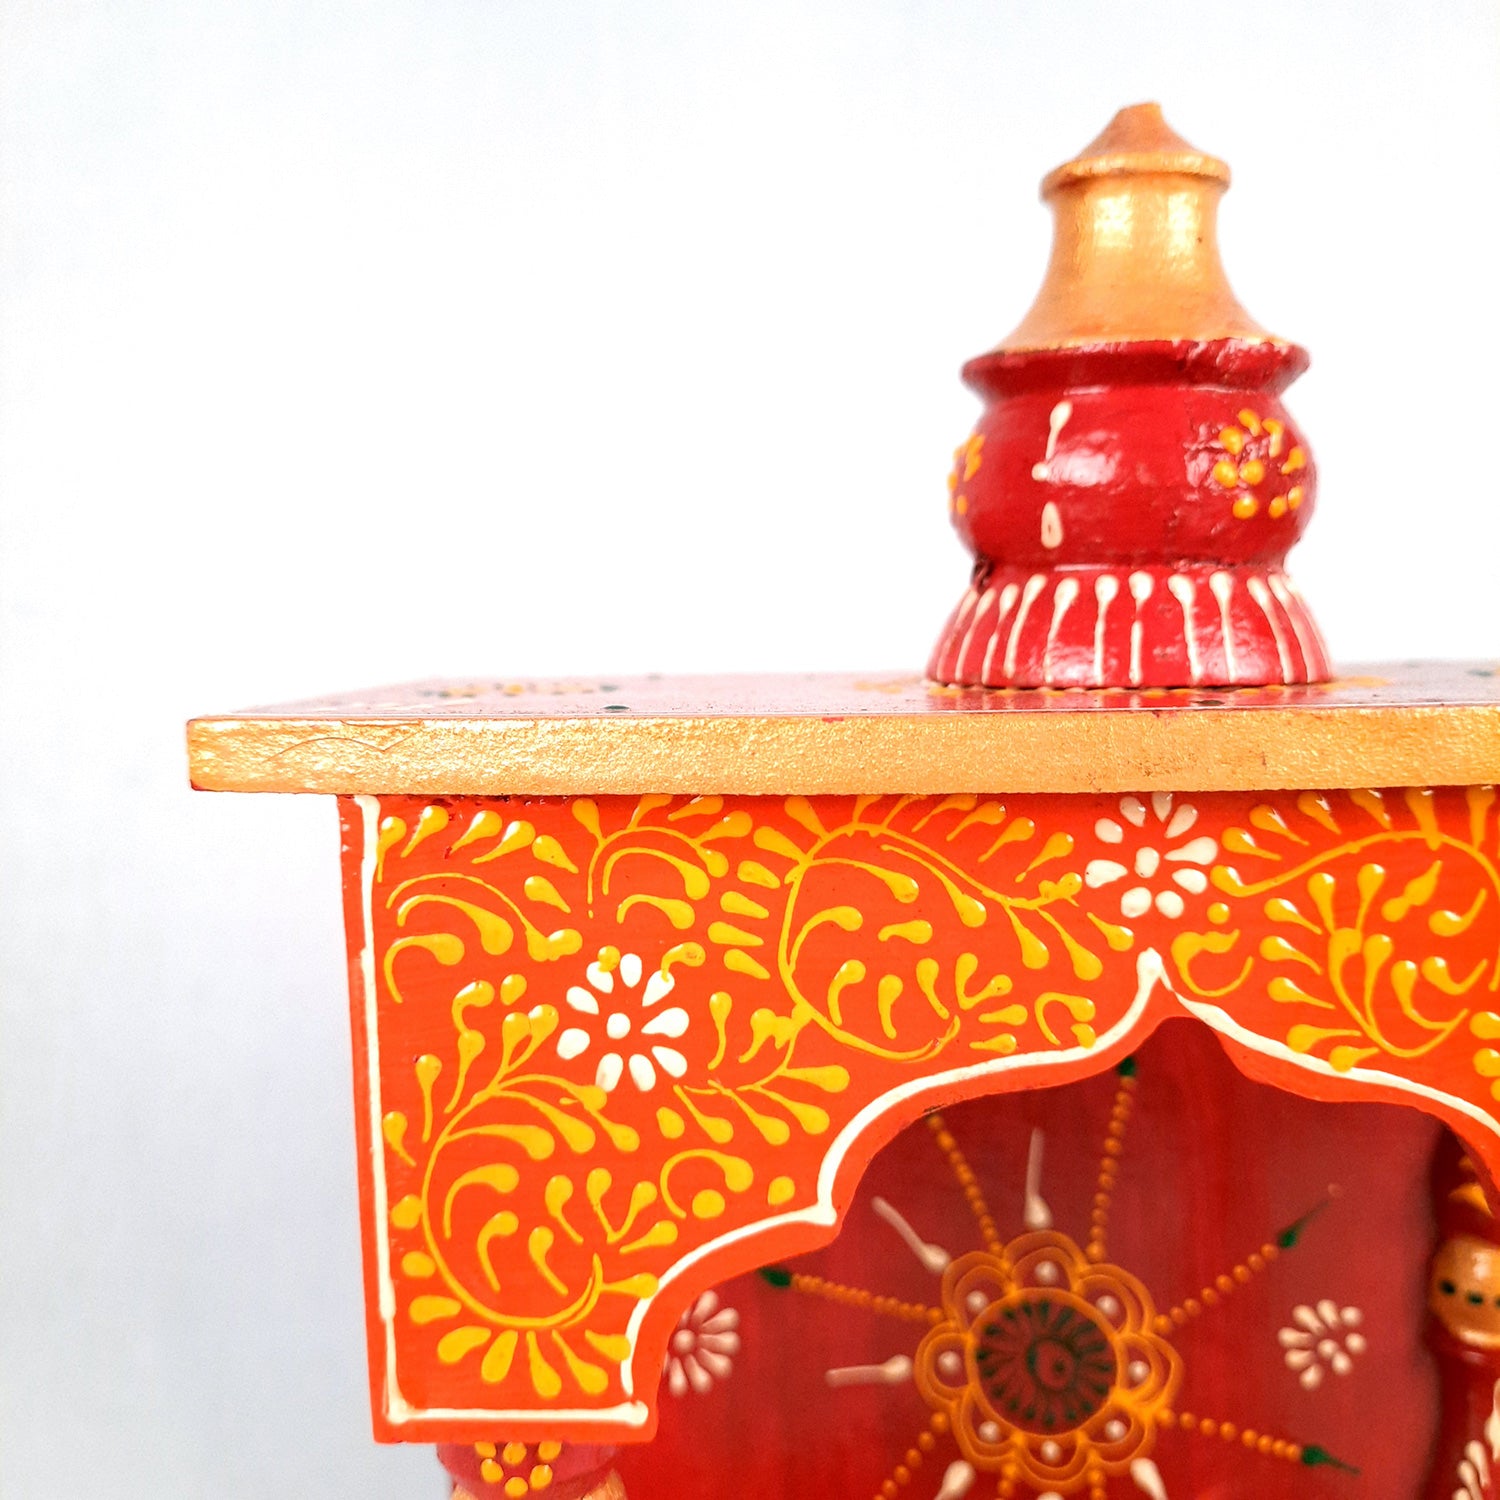 Pooja Temple Wooden | God Temple For Home With In Built Drawer | Puja Mandir With Storage | Pooja Unit Wall Mounted - For Ghar, Office, House, Shop 13 inch -Apkamart